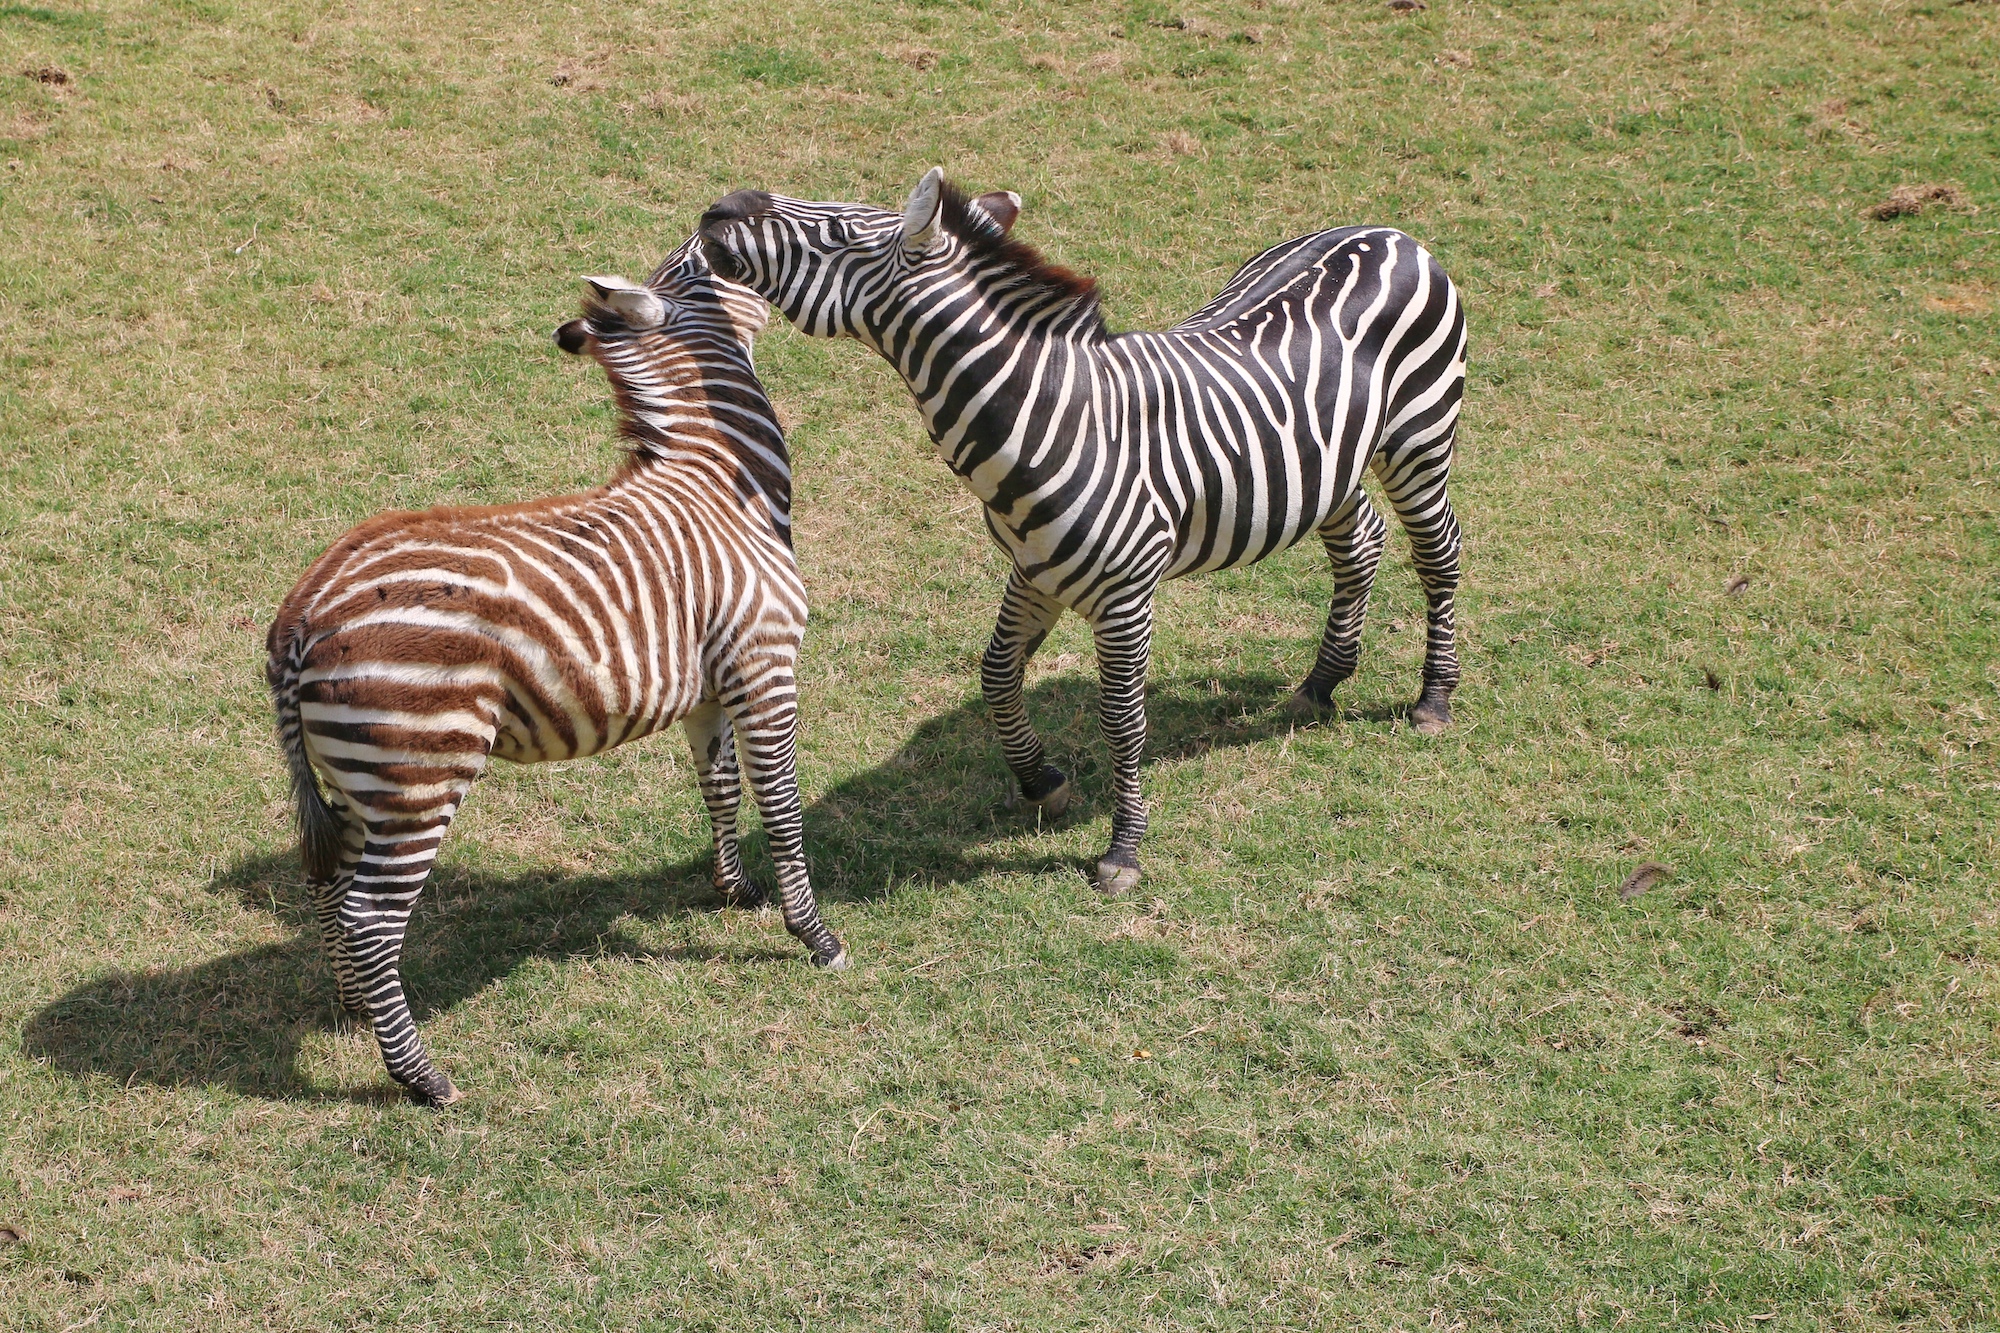 zebras playing at Fort Worth zoo